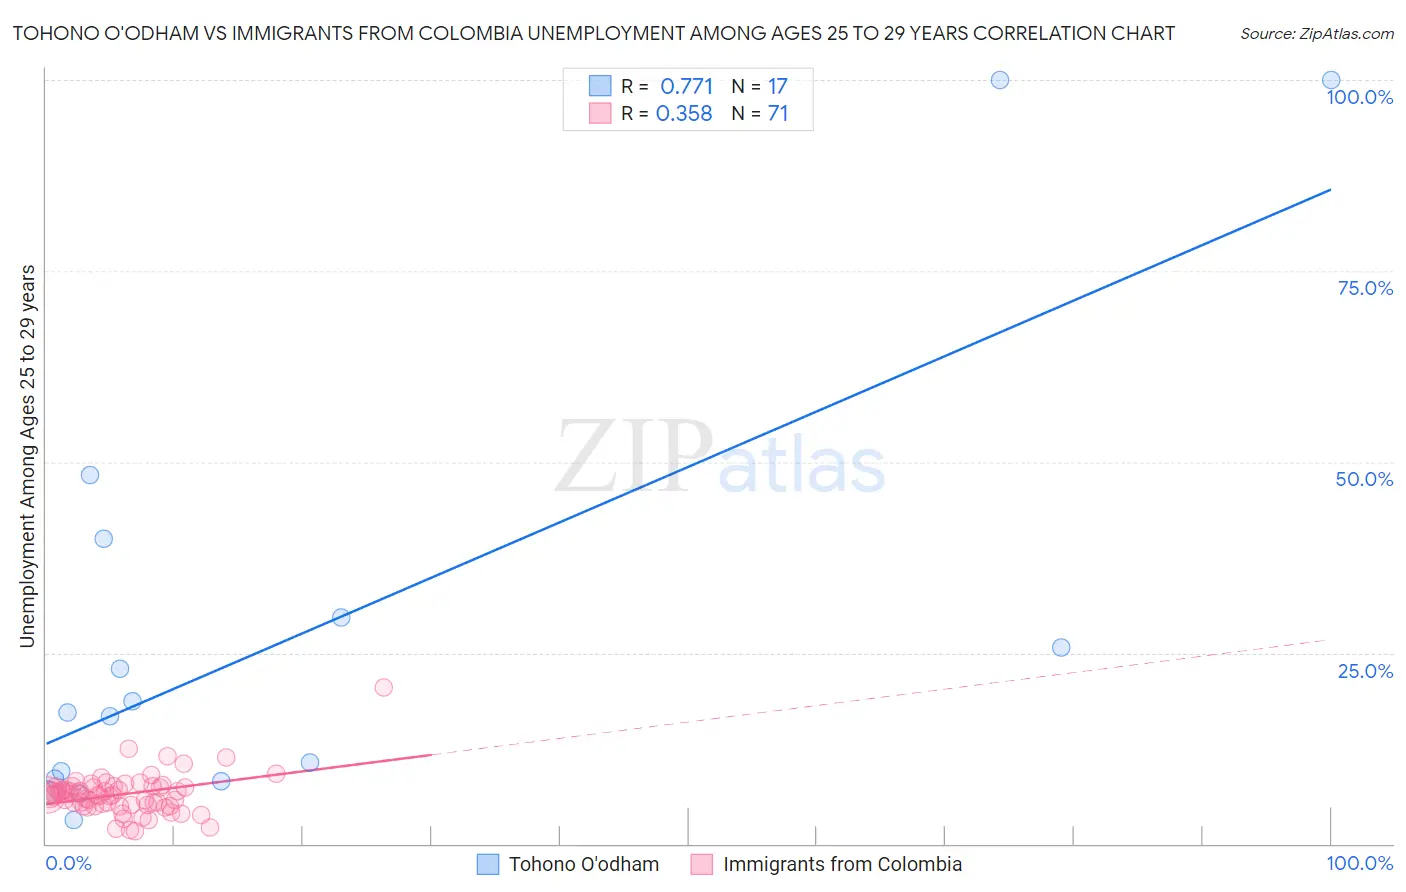 Tohono O'odham vs Immigrants from Colombia Unemployment Among Ages 25 to 29 years